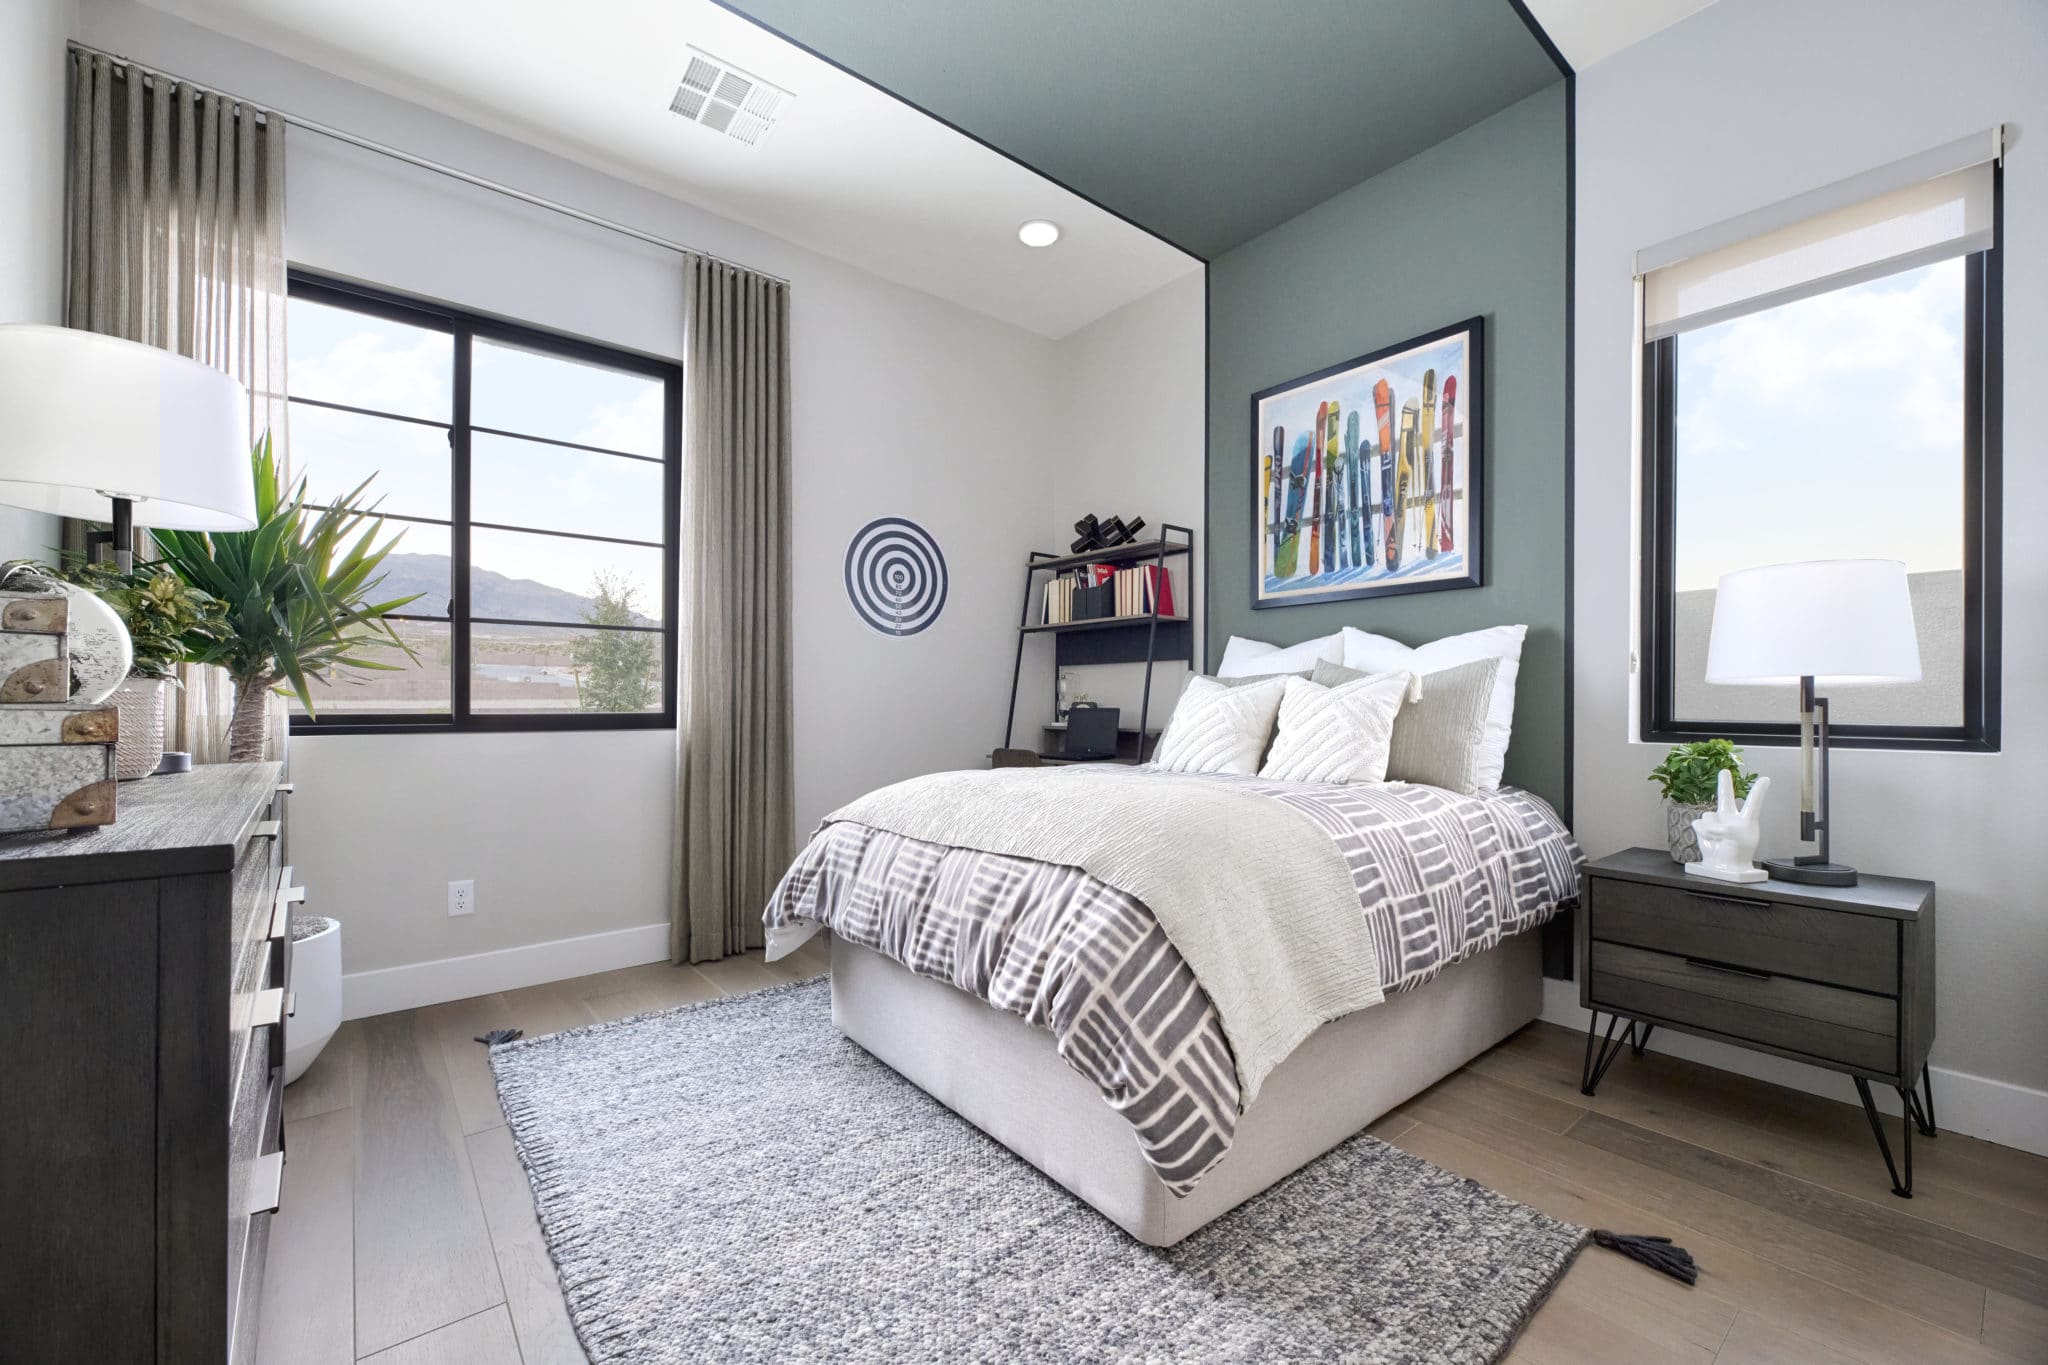 Bedroom of Plan 1 at Overlook by Tri Pointe